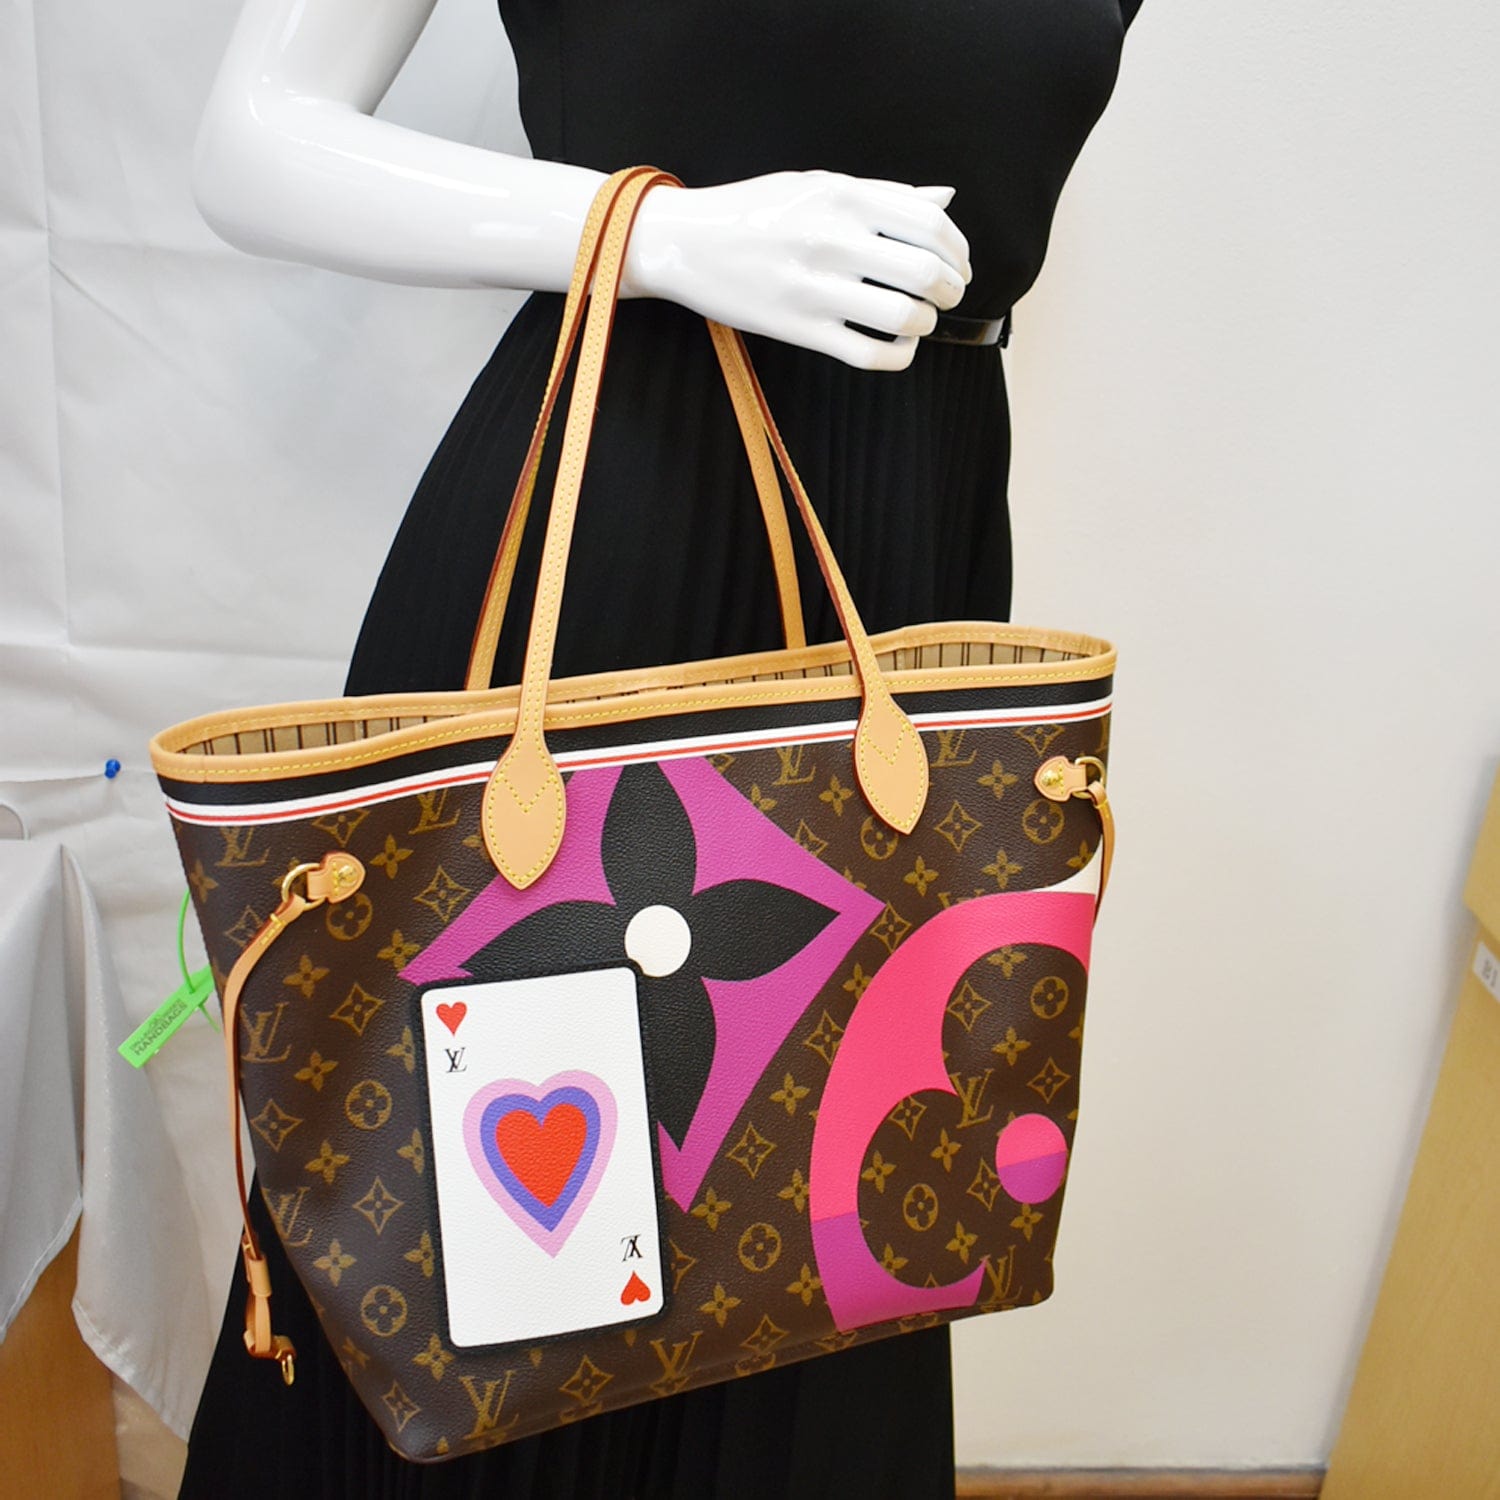 LOUIS VUITTON Monogram Game On Neverfull MM Tote Bag M57452 LV